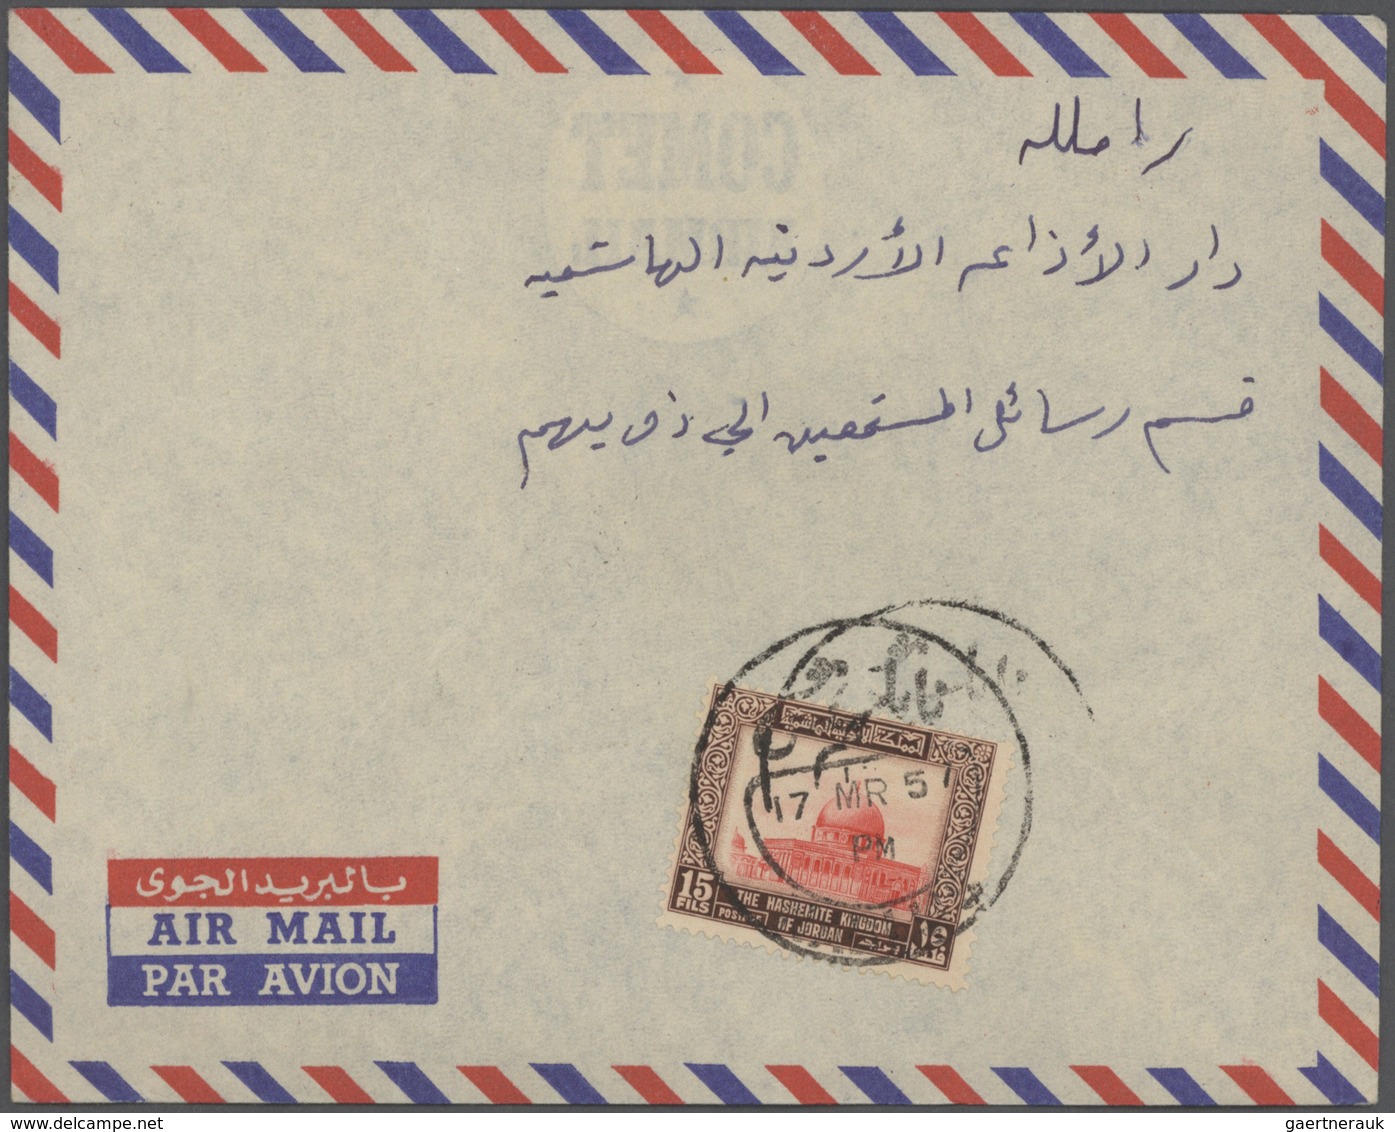 23279 Jordanien: 1925-80, Box containing 3040 covers & FDC, including registered mail, air mail, overprint